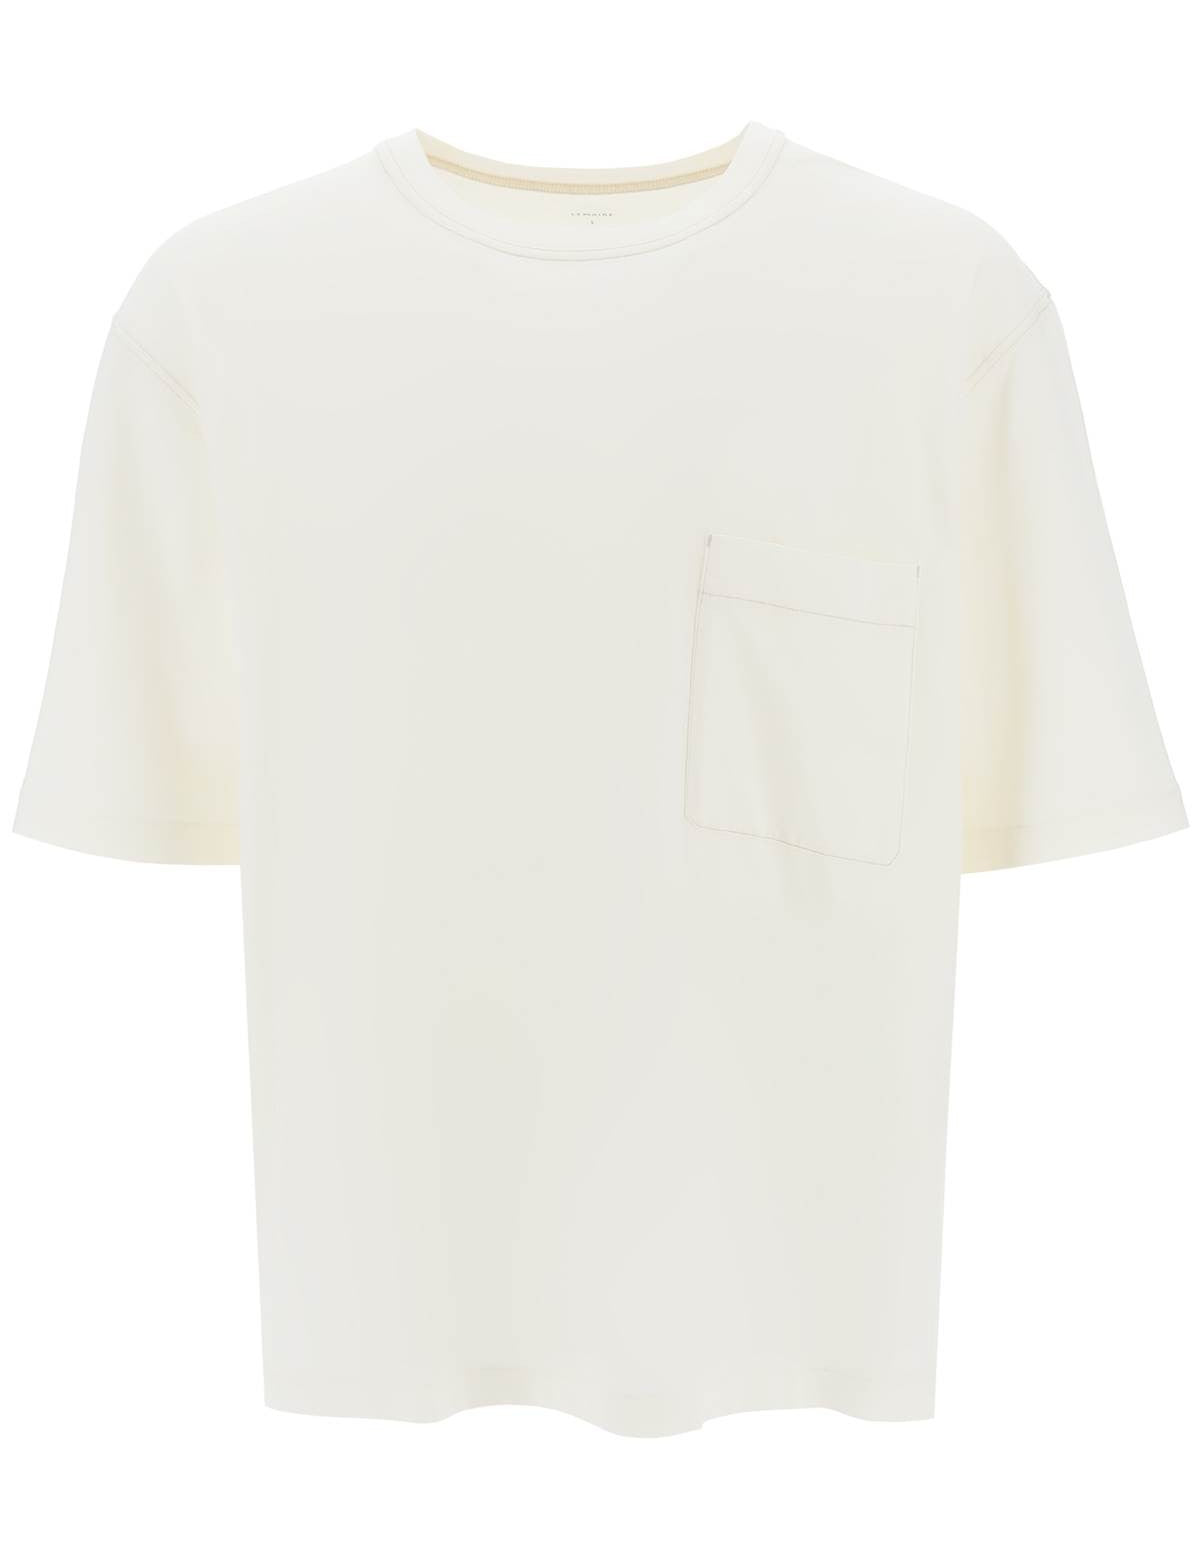 lemaire-oversized-t-shirt-with-patch-pocket.jpg